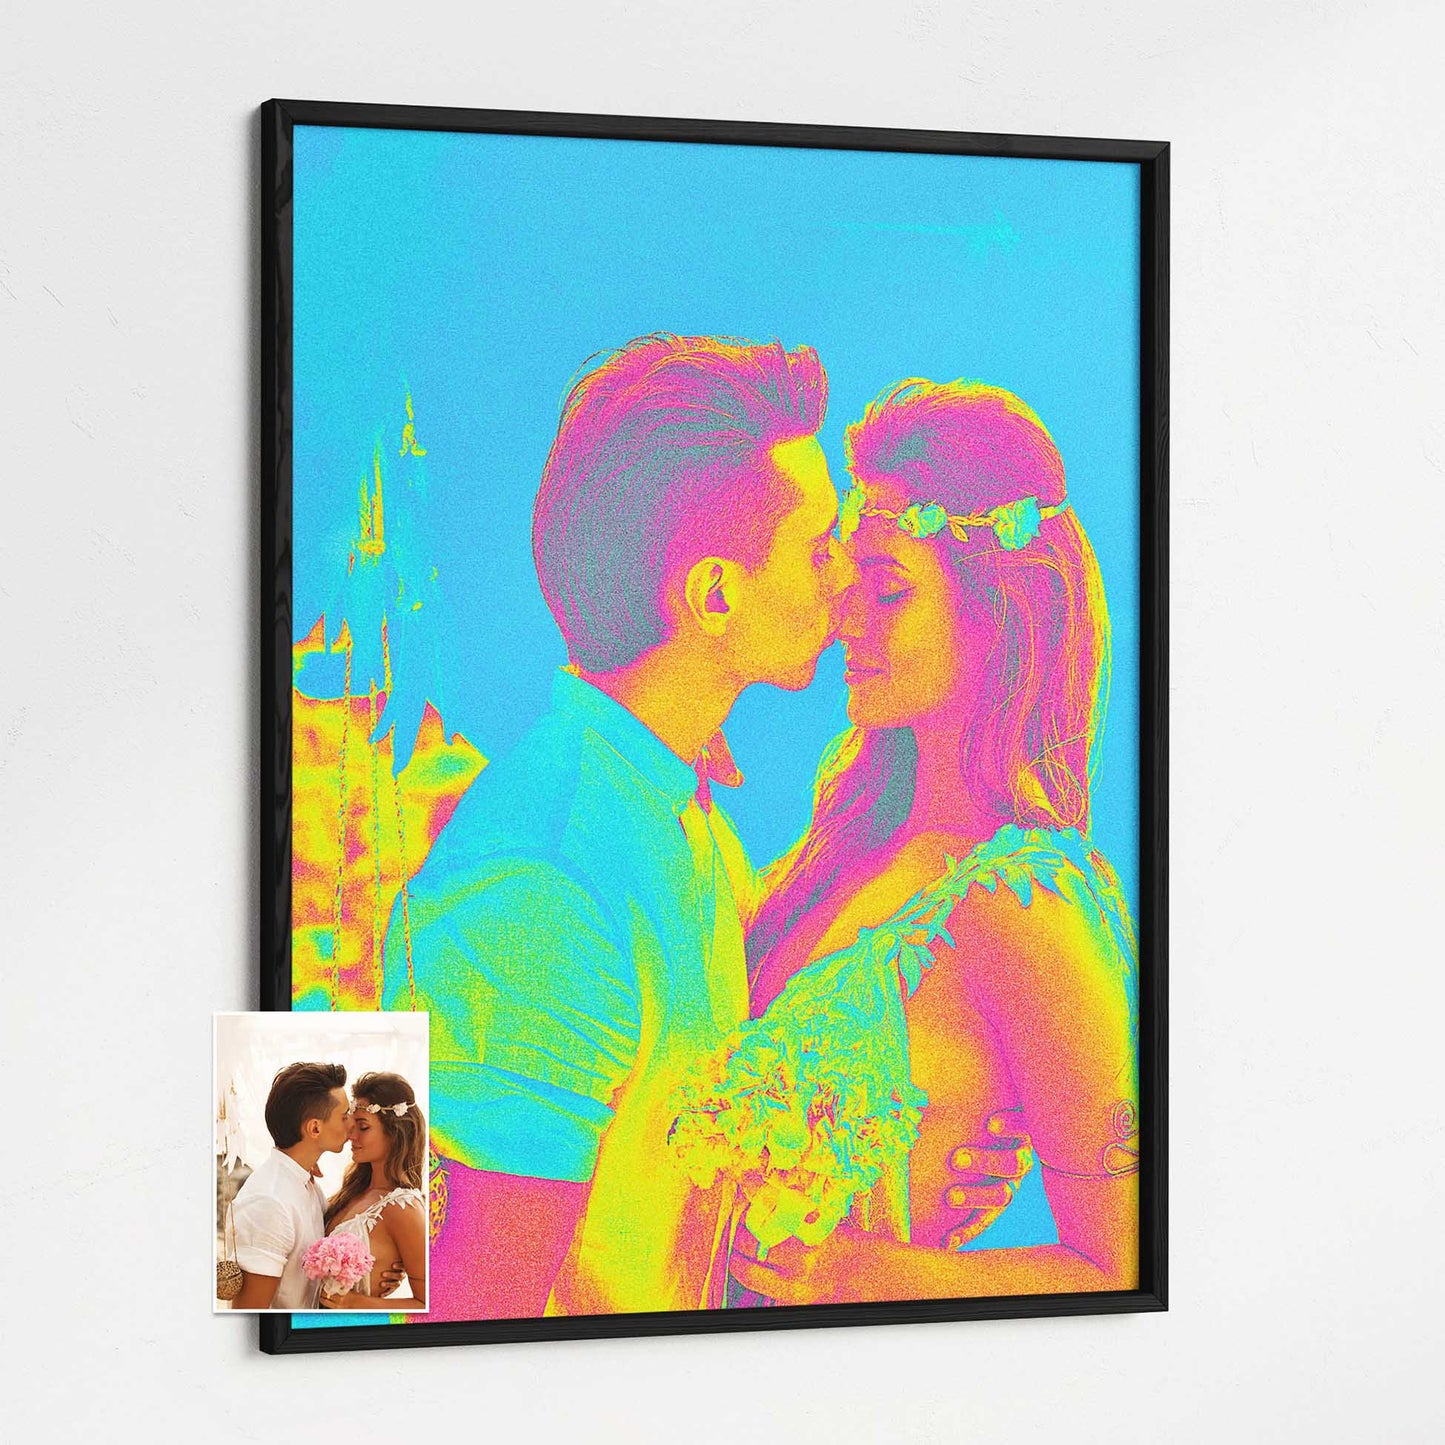 Personalised Acid Trip Framed Print is a must-have for art lovers seeking a unique and vibrant piece. This fine digital art features a colorful and vivid design that grabs attention and makes a bold statement